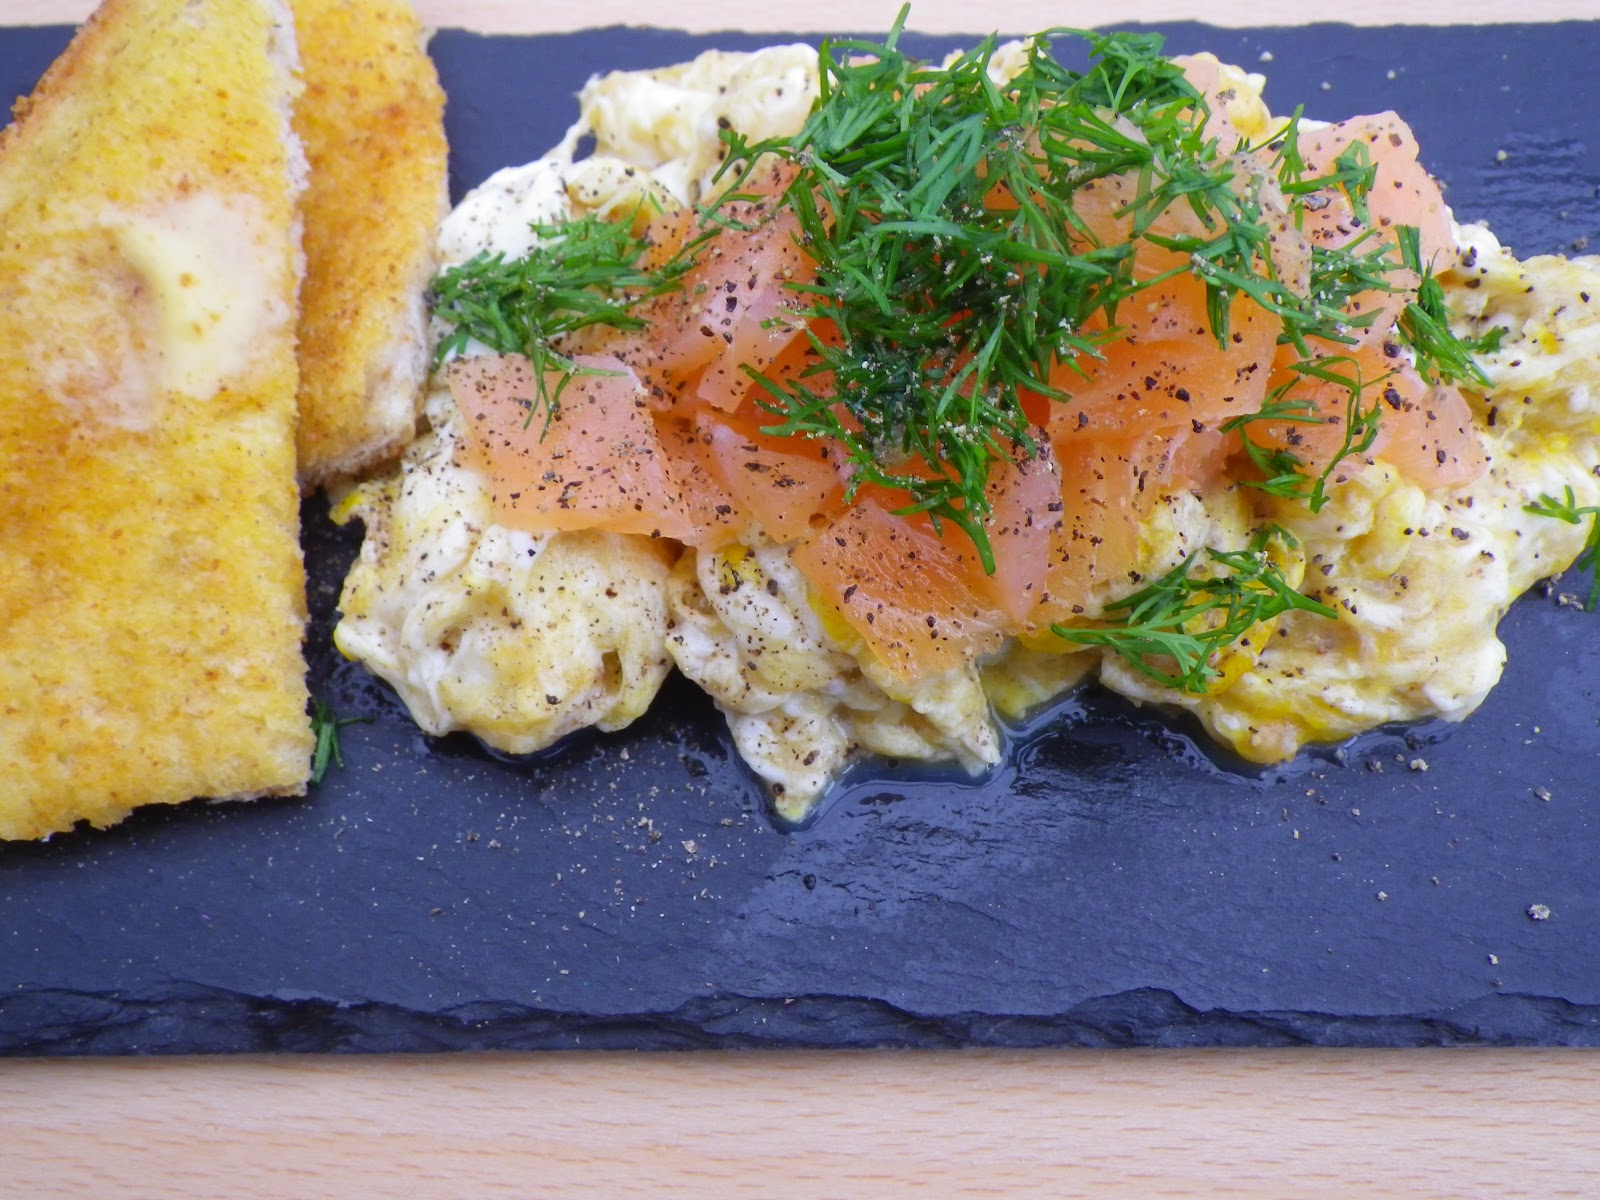 Scrambled Eggs with Smoked Salmon & Dill